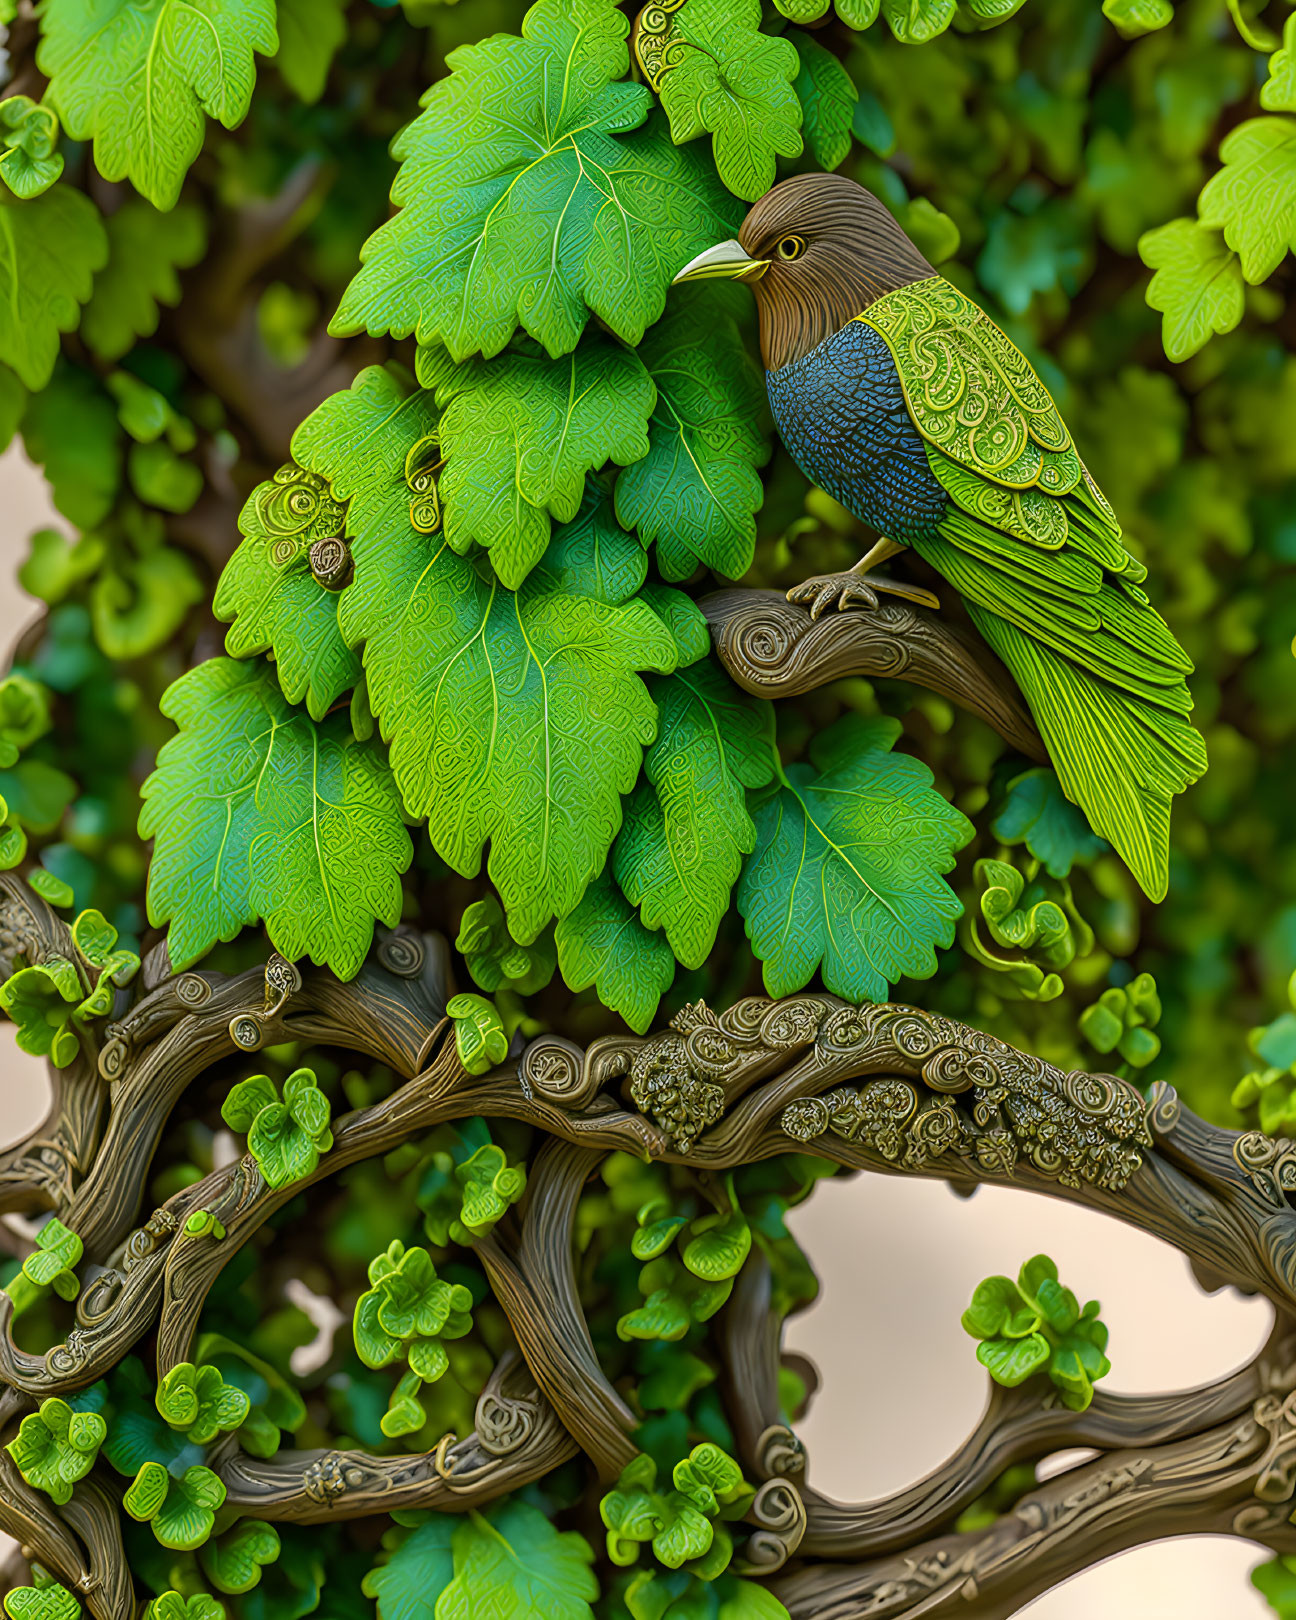 Detailed digital artwork: Stylized bird perched on ornate tree branches